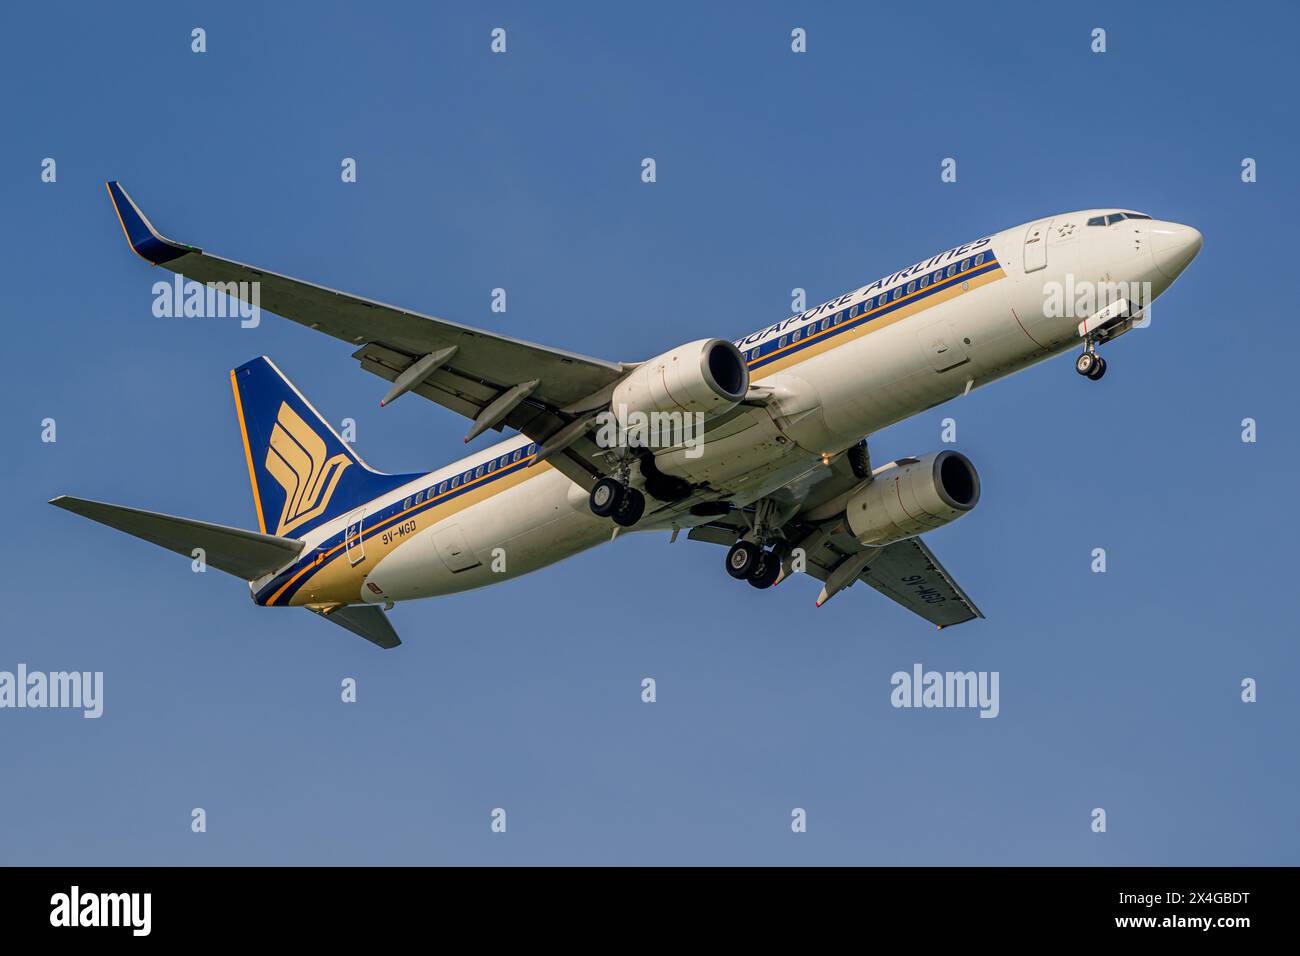 Singapore Airlines, Boeing 737-800, 9V-MGD, on final approach to Singapore Changi airport Stock Photo